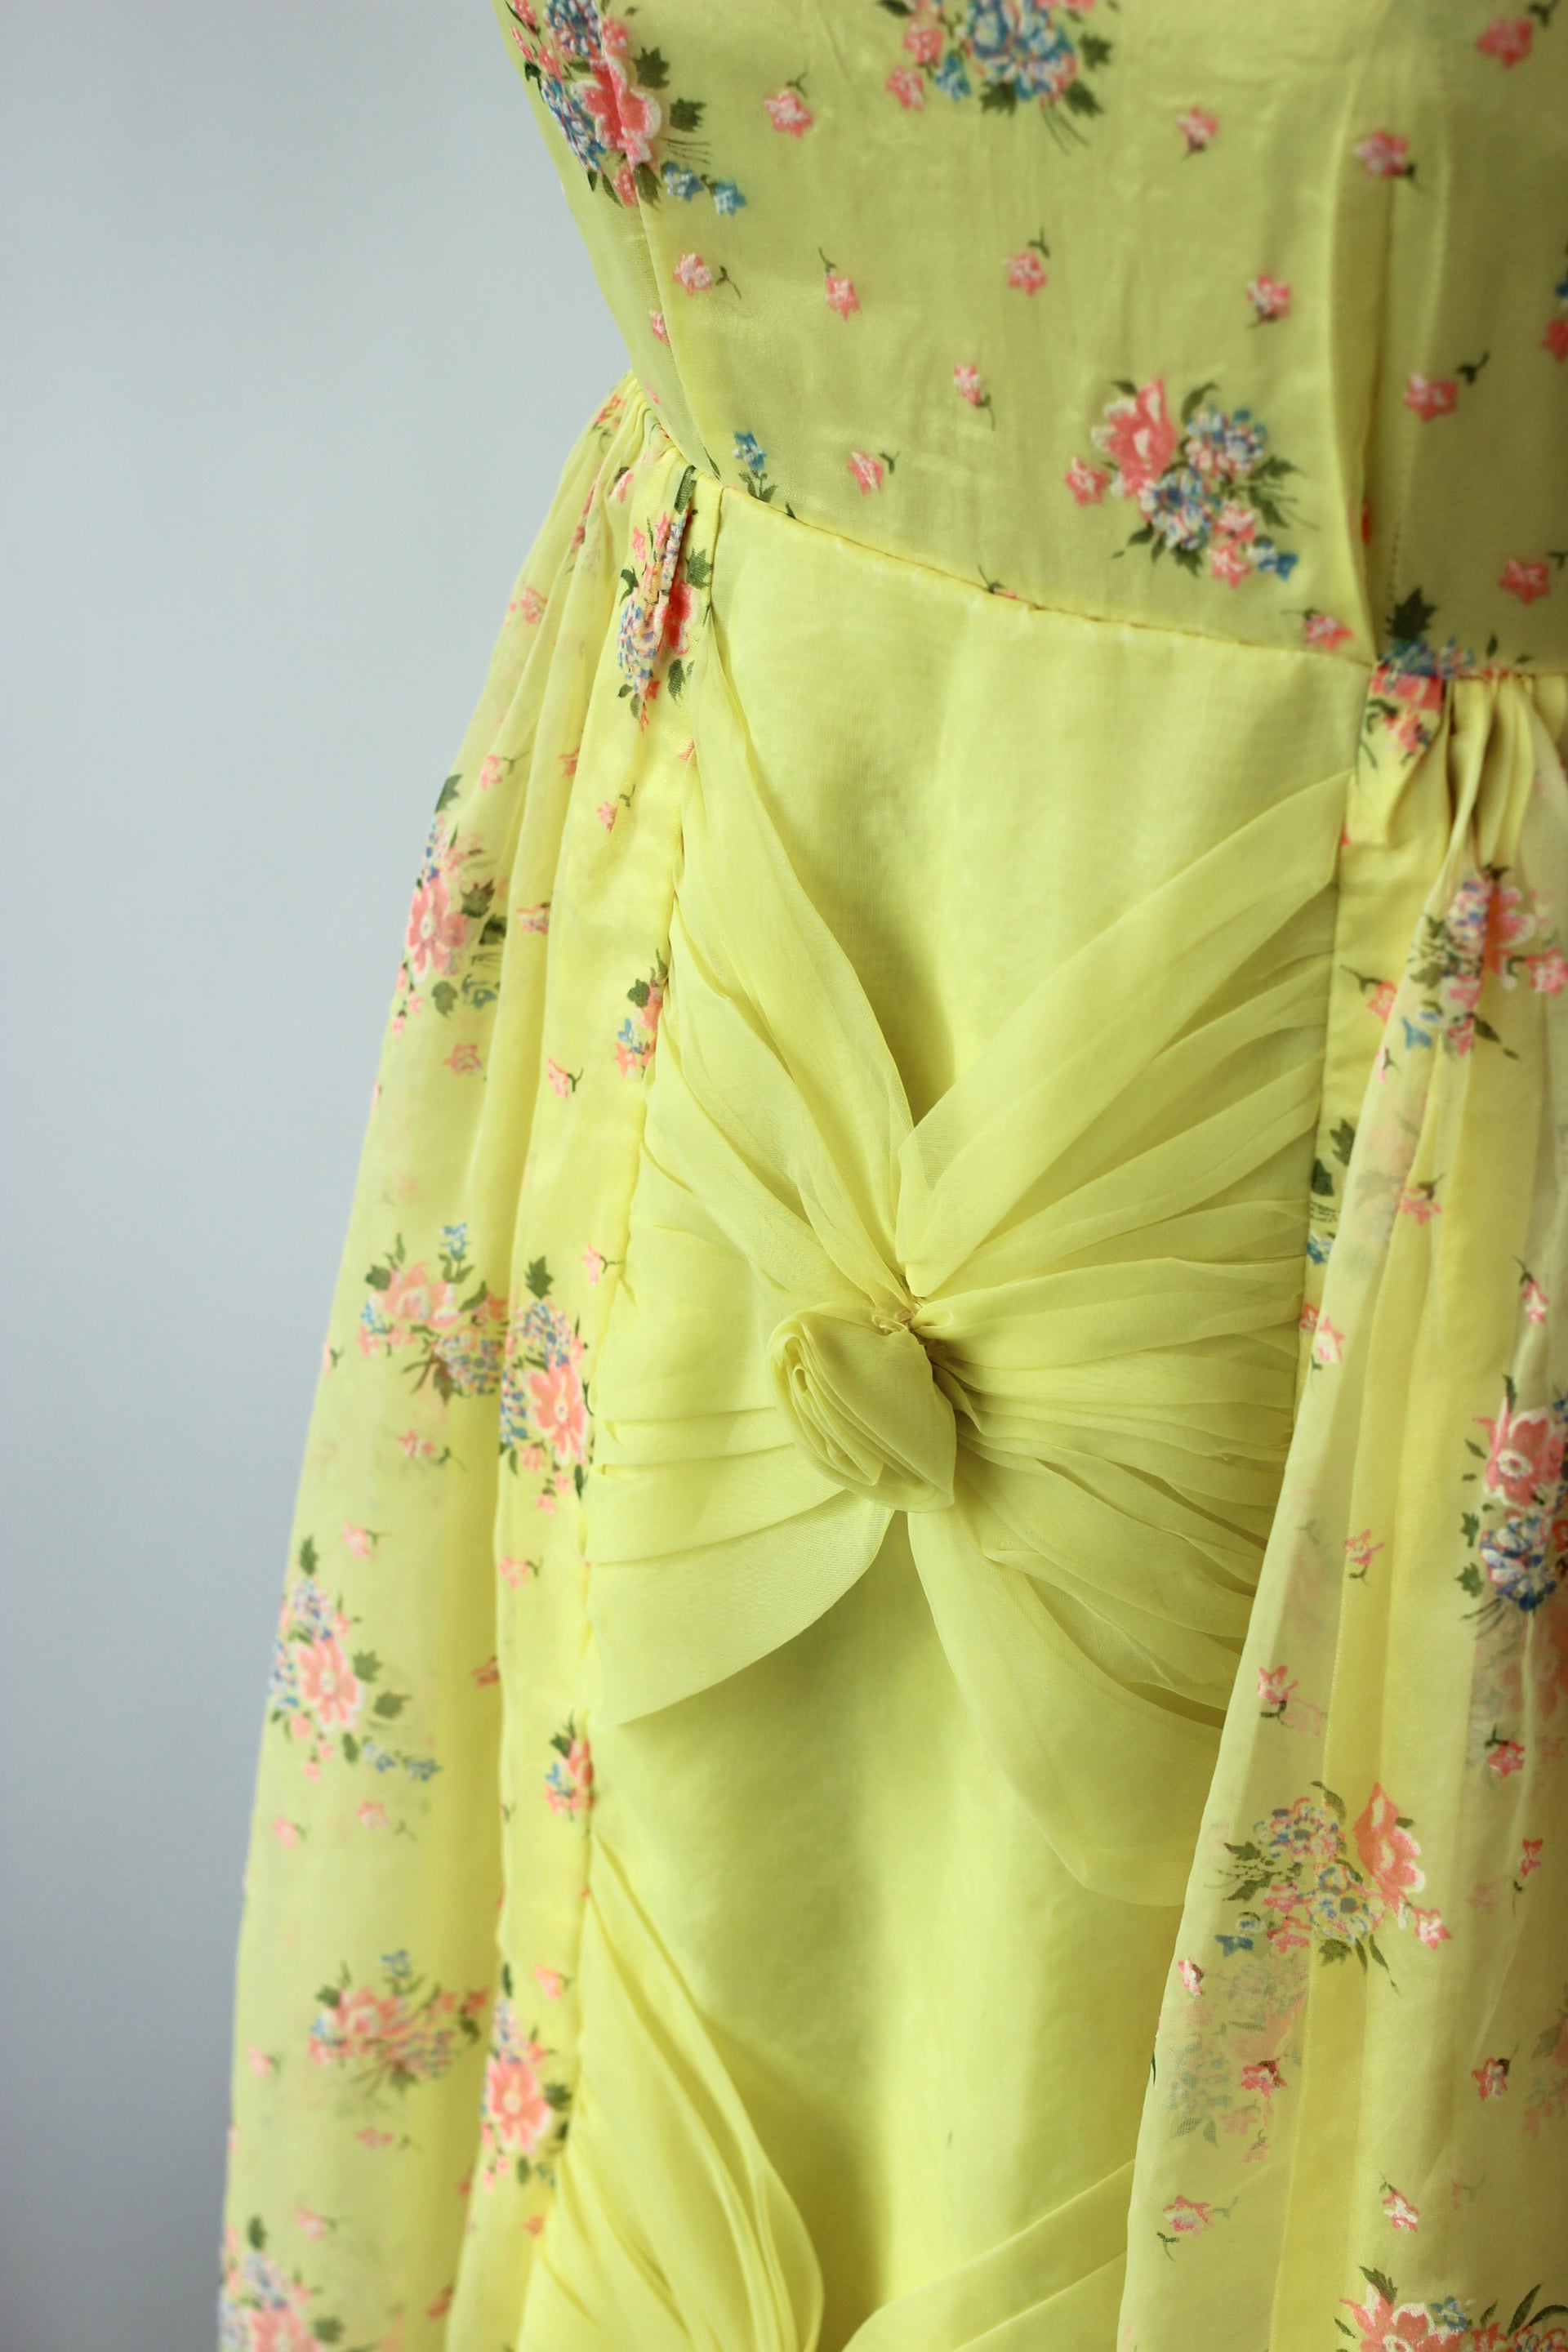 1950s Yellow Sheer Dress with Flower Print//Size M